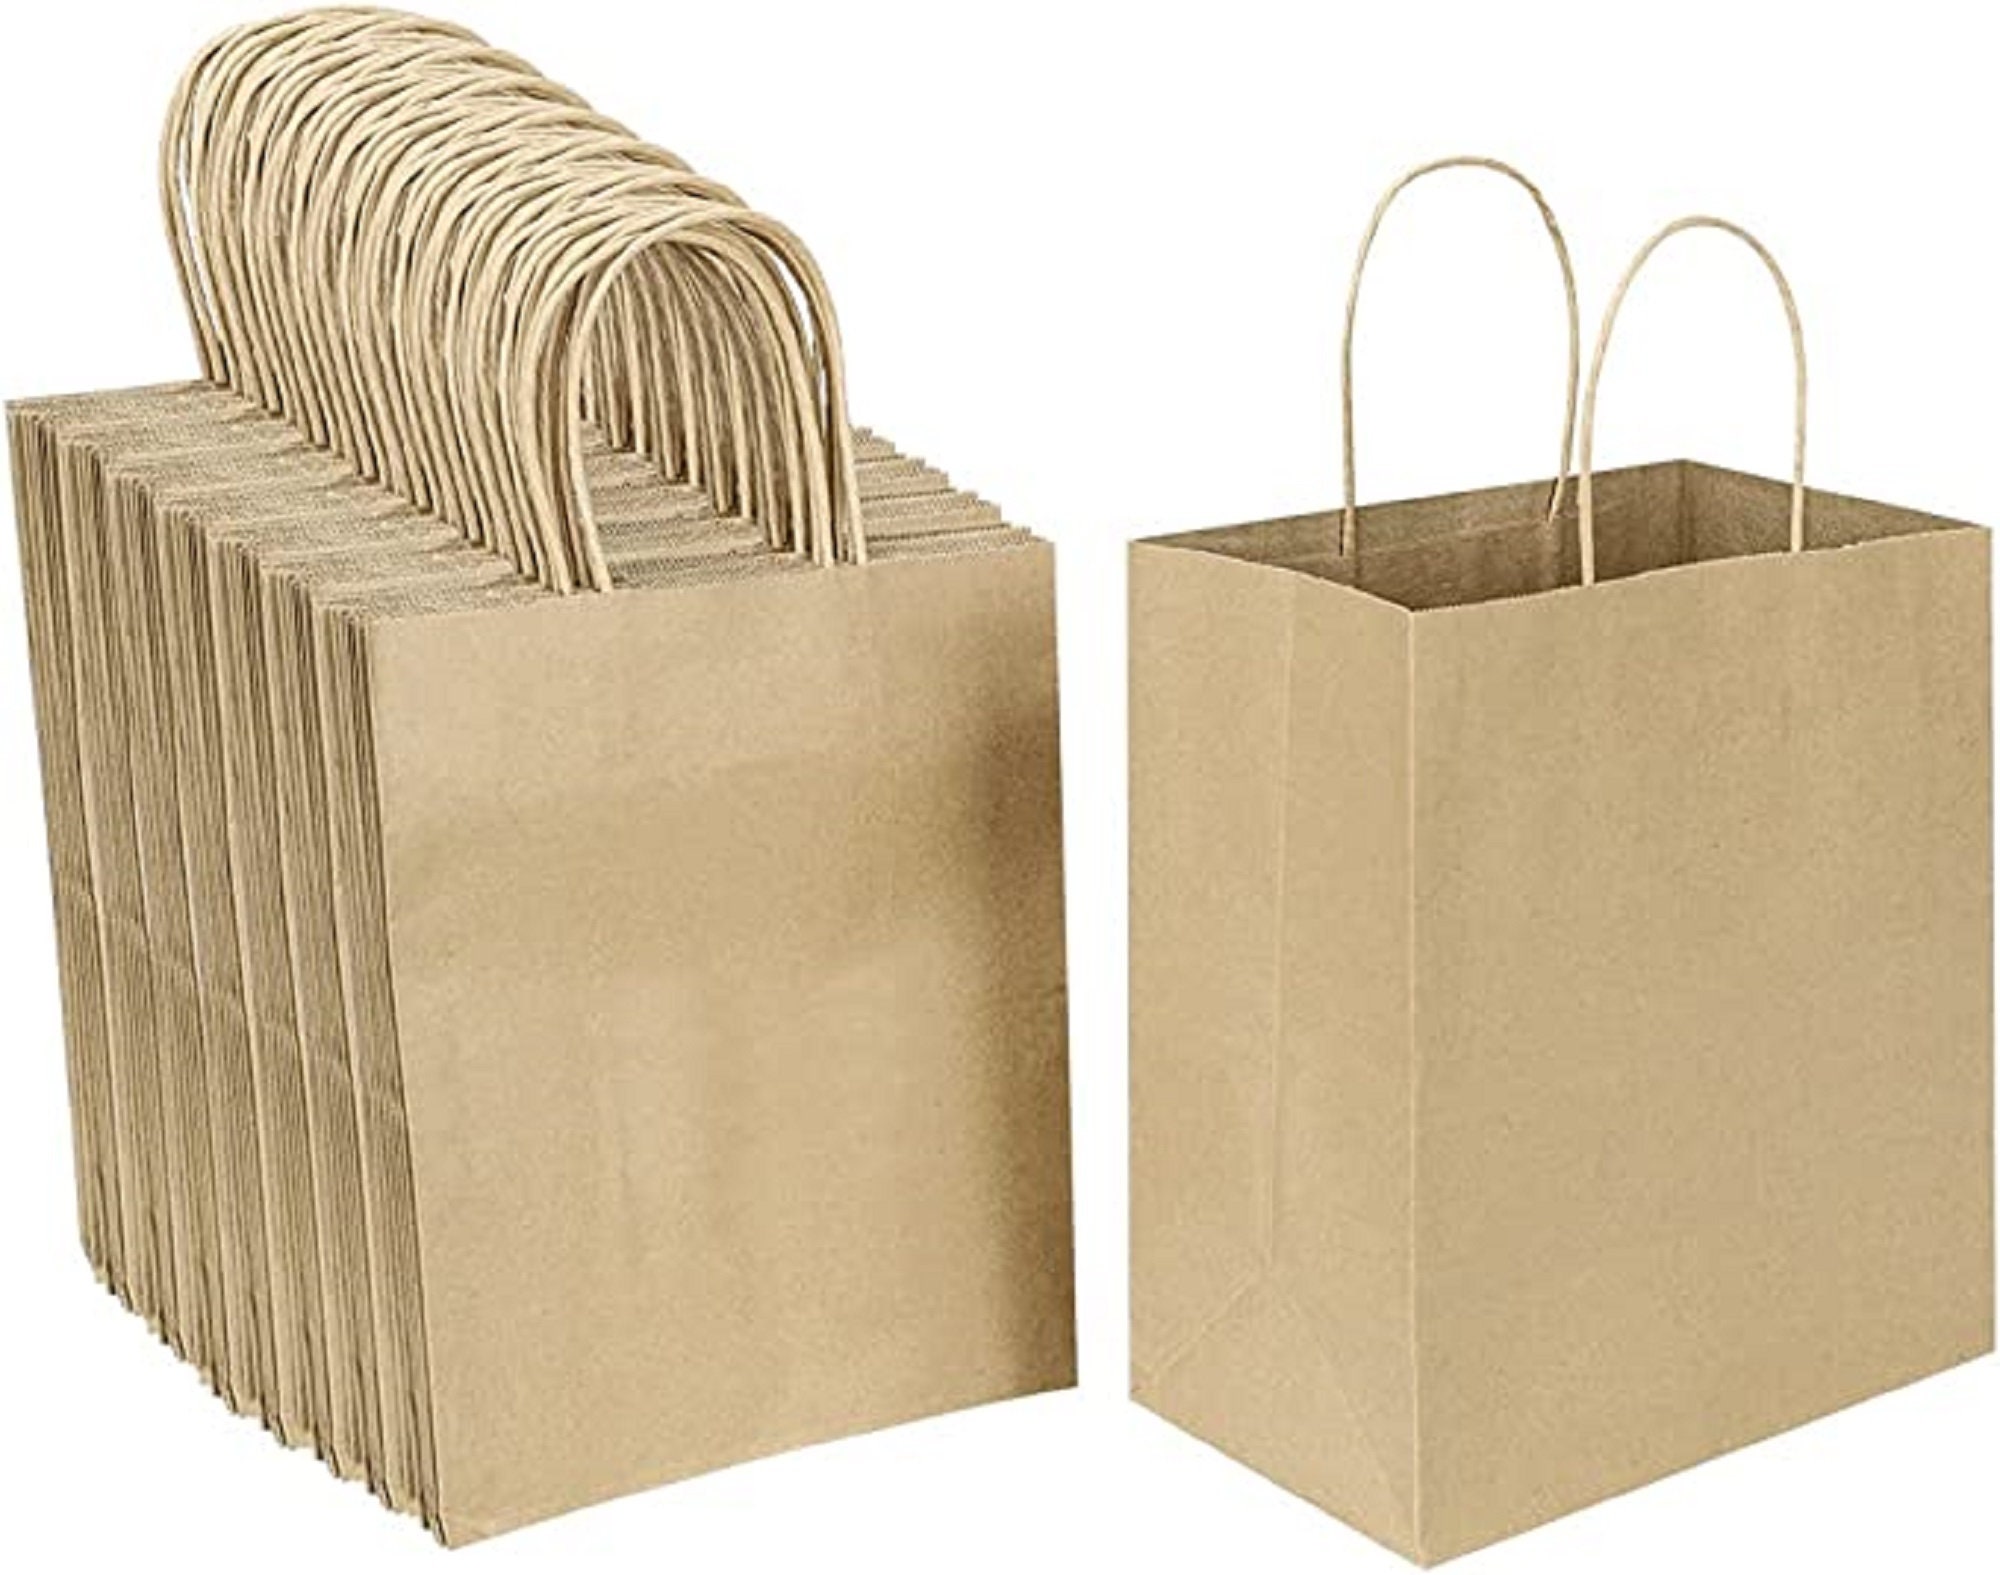 [100 Bags] 8 x 4.5 x 10.5 Brown Kraft Paper Gift Bags Bulk with Handles. Ideal for Shopping Packaging Retail Party Craft Gifts Wedding